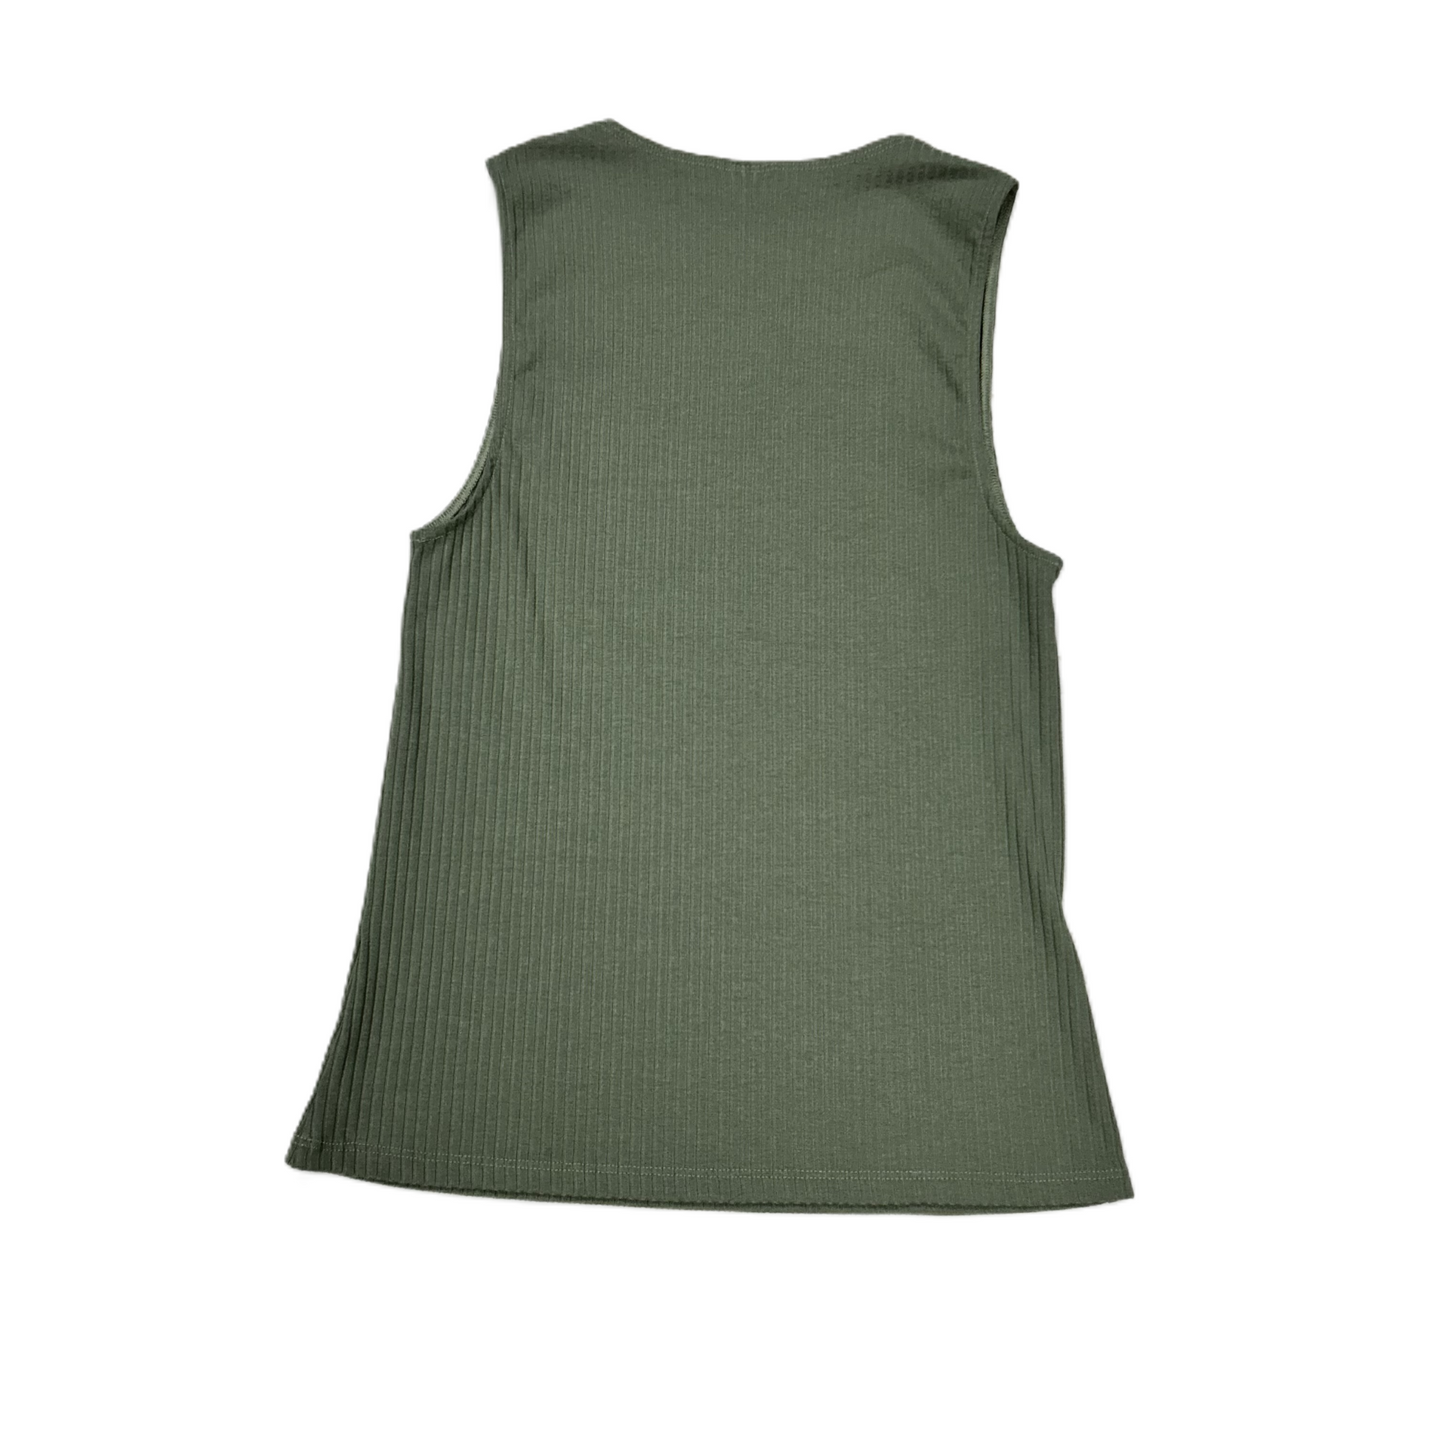 Top Sleeveless Designer By Only Hearts  Size: M